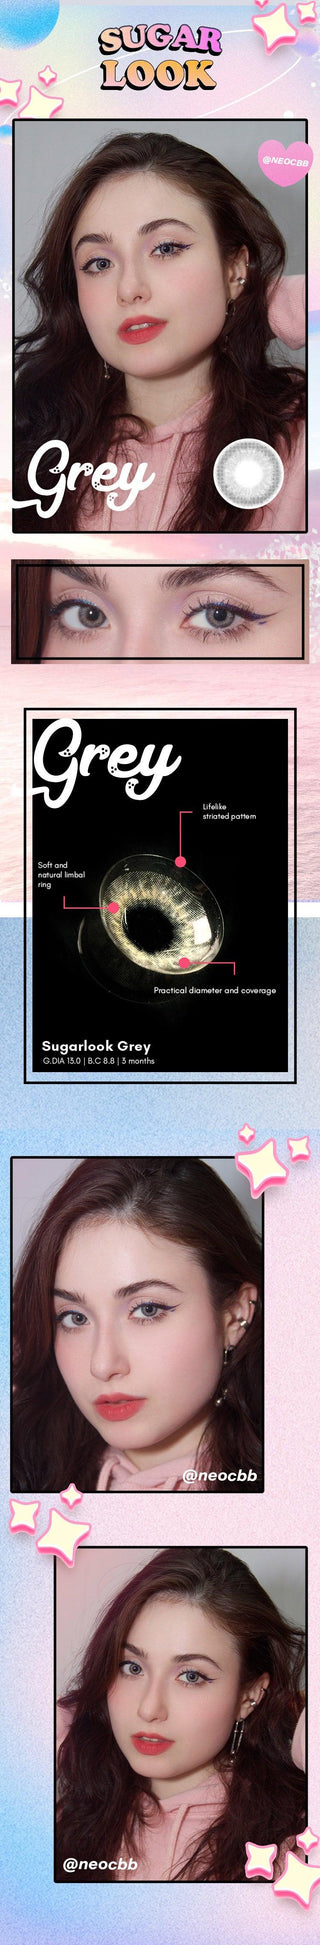 Limited Edition Sugarlook Grey Lens (1 PAIR) Color Contact Lens - EyeCandys